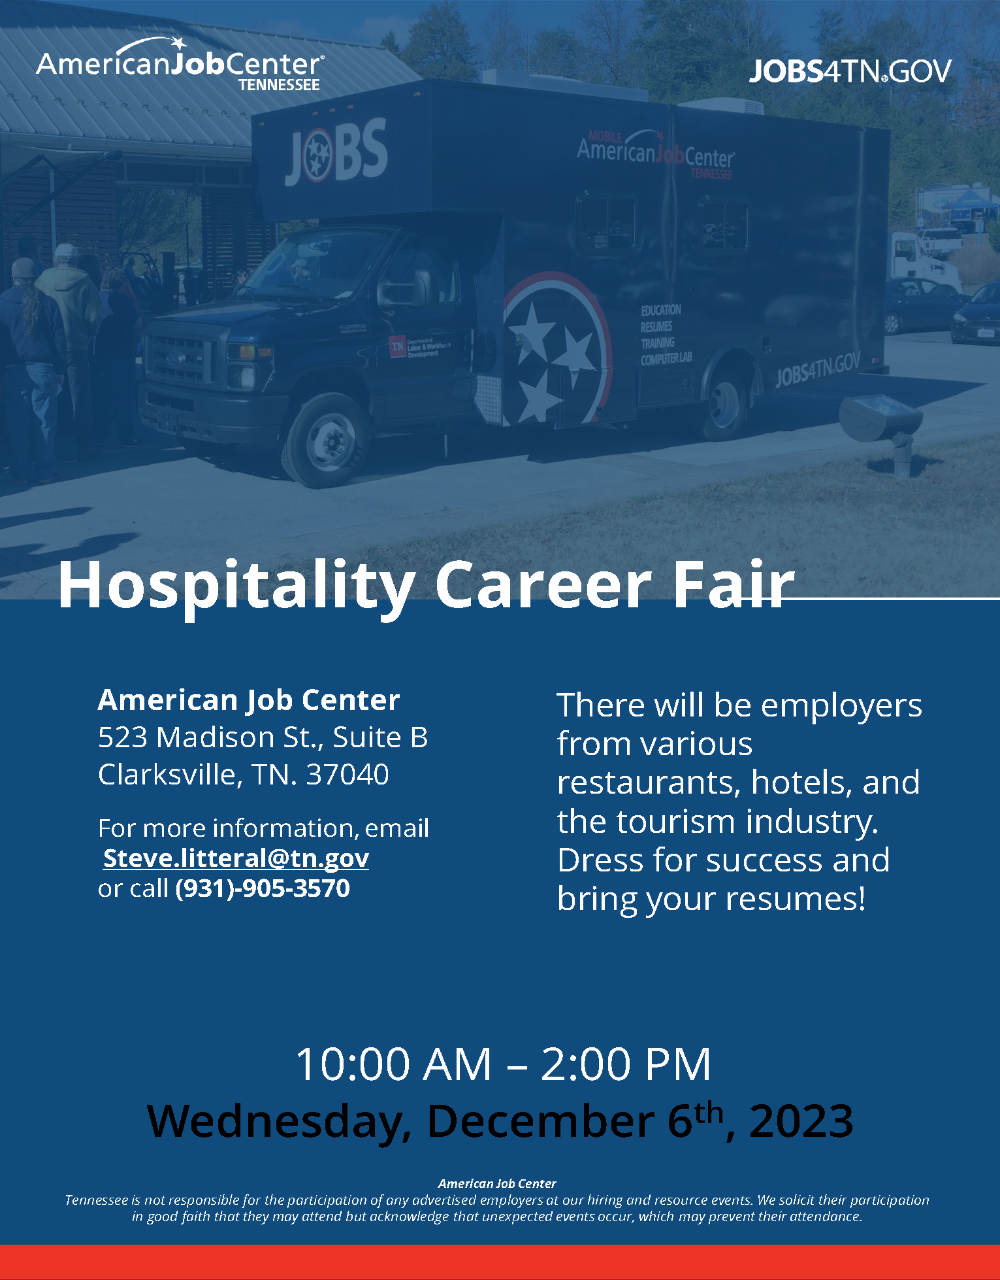 Hospitality Career Fair in Clarksville, TN, AJC, December 6, 2023, 10 a.m. to 2 p.m. CST